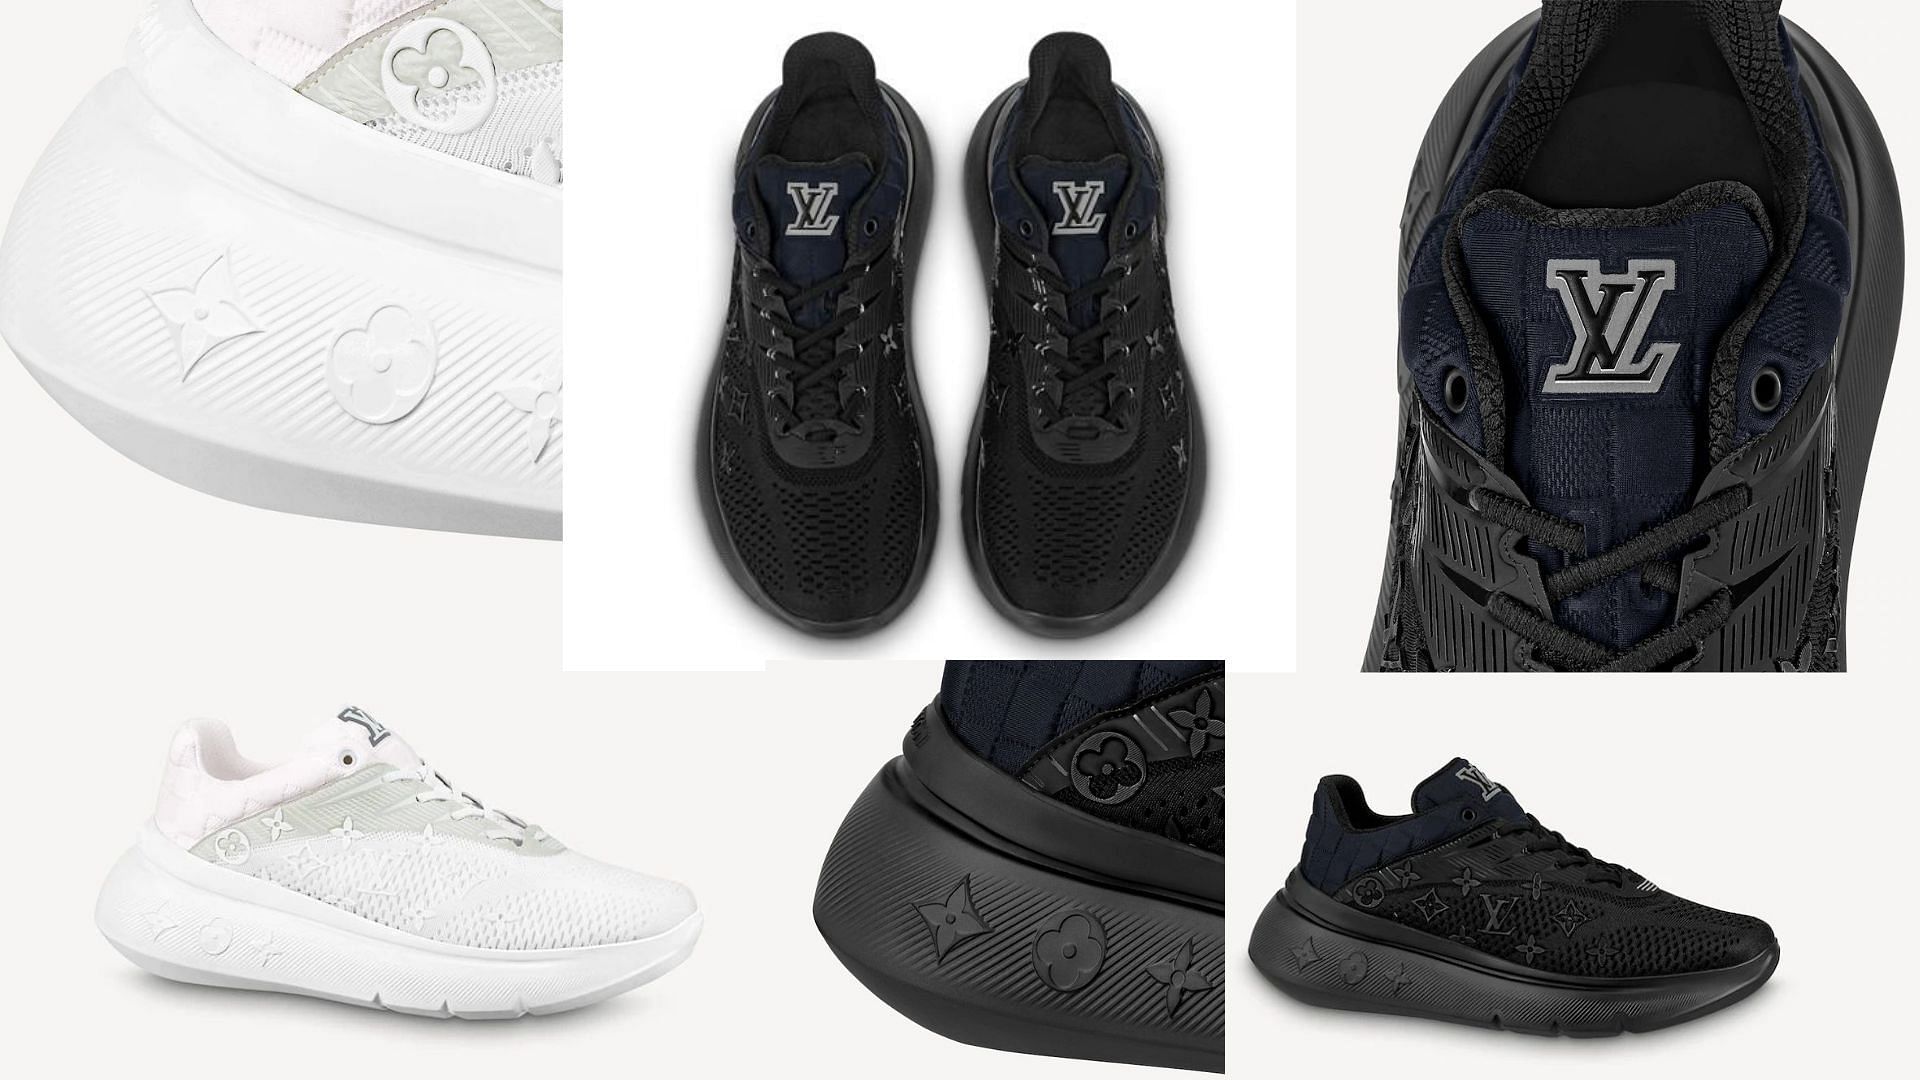 Where to buy Louis Vuitton sneakers with flower monogram? Price